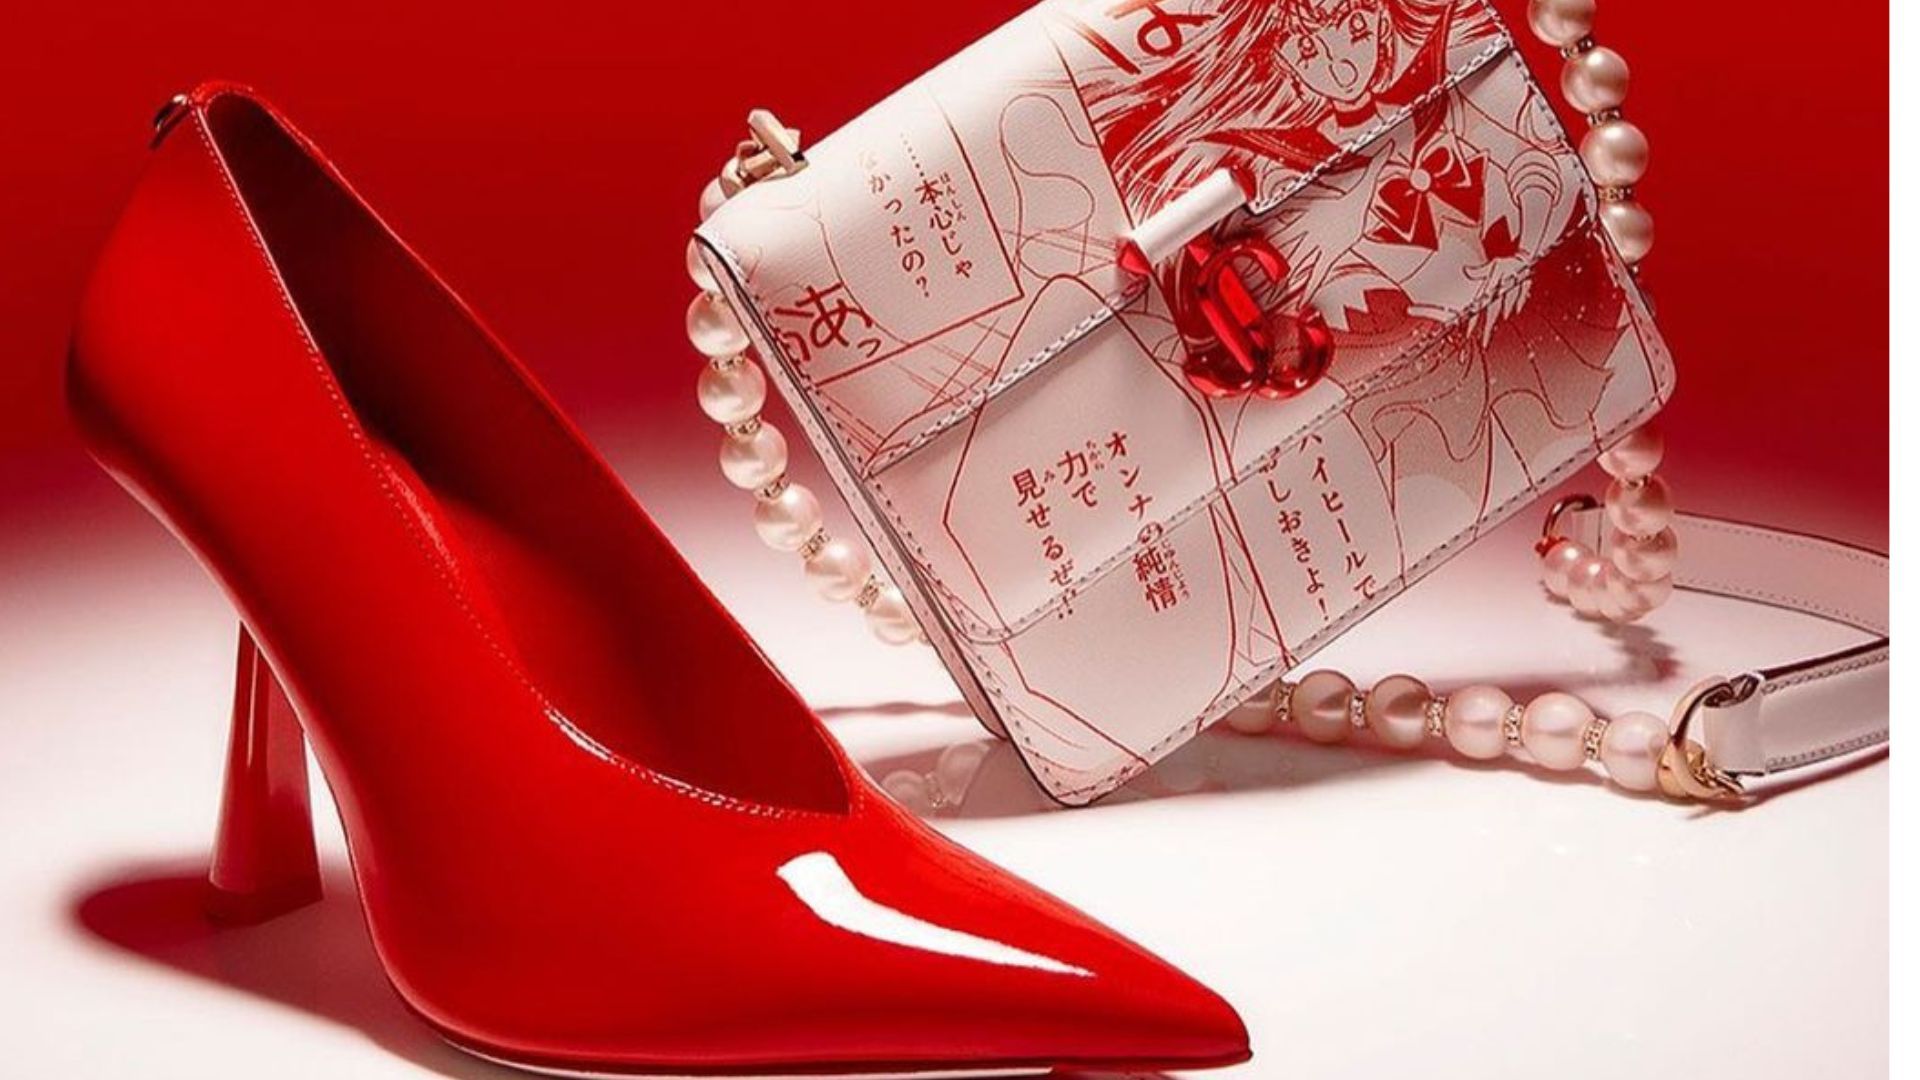 Jimmy Choo has unveiled a full-blown 'Sailor Moon-inspired